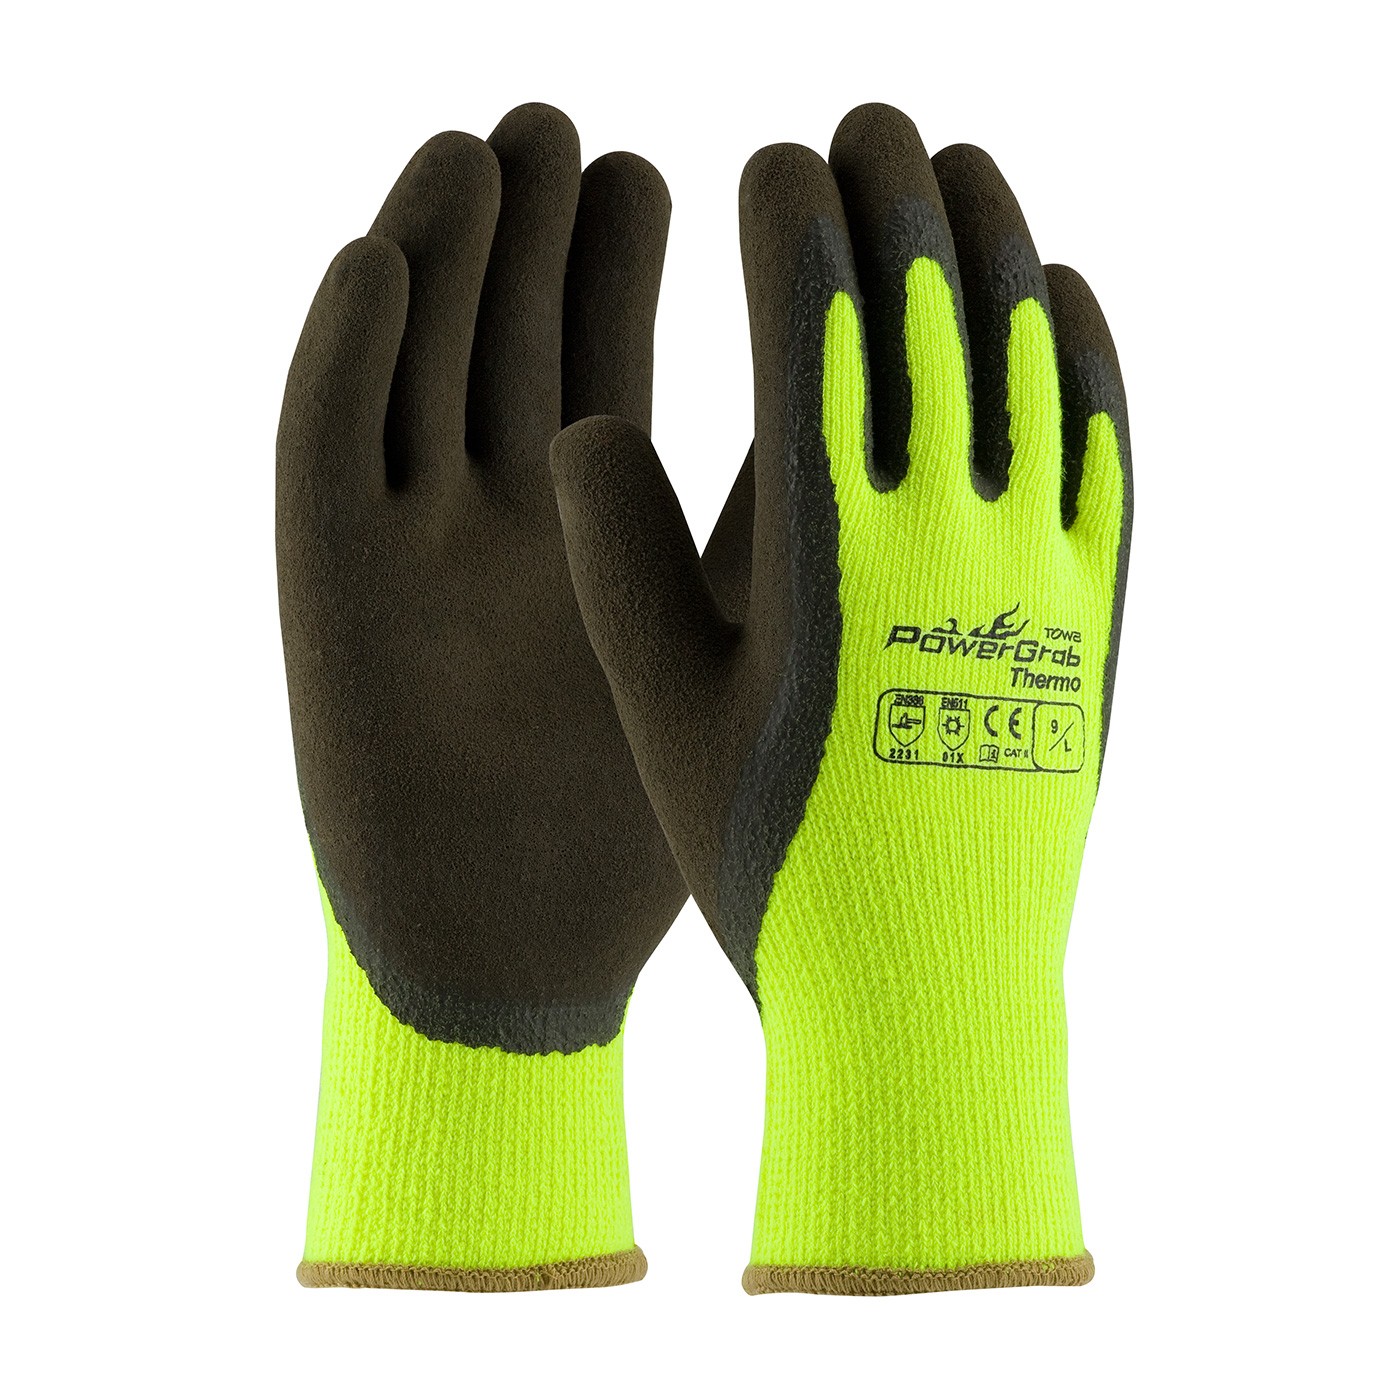 PowerGrab™ Thermo Hi-Vis Seamless Knit Acrylic Terry Glove with Latex MicroFinish Grip on Palm & Fingers  (#41-1405)